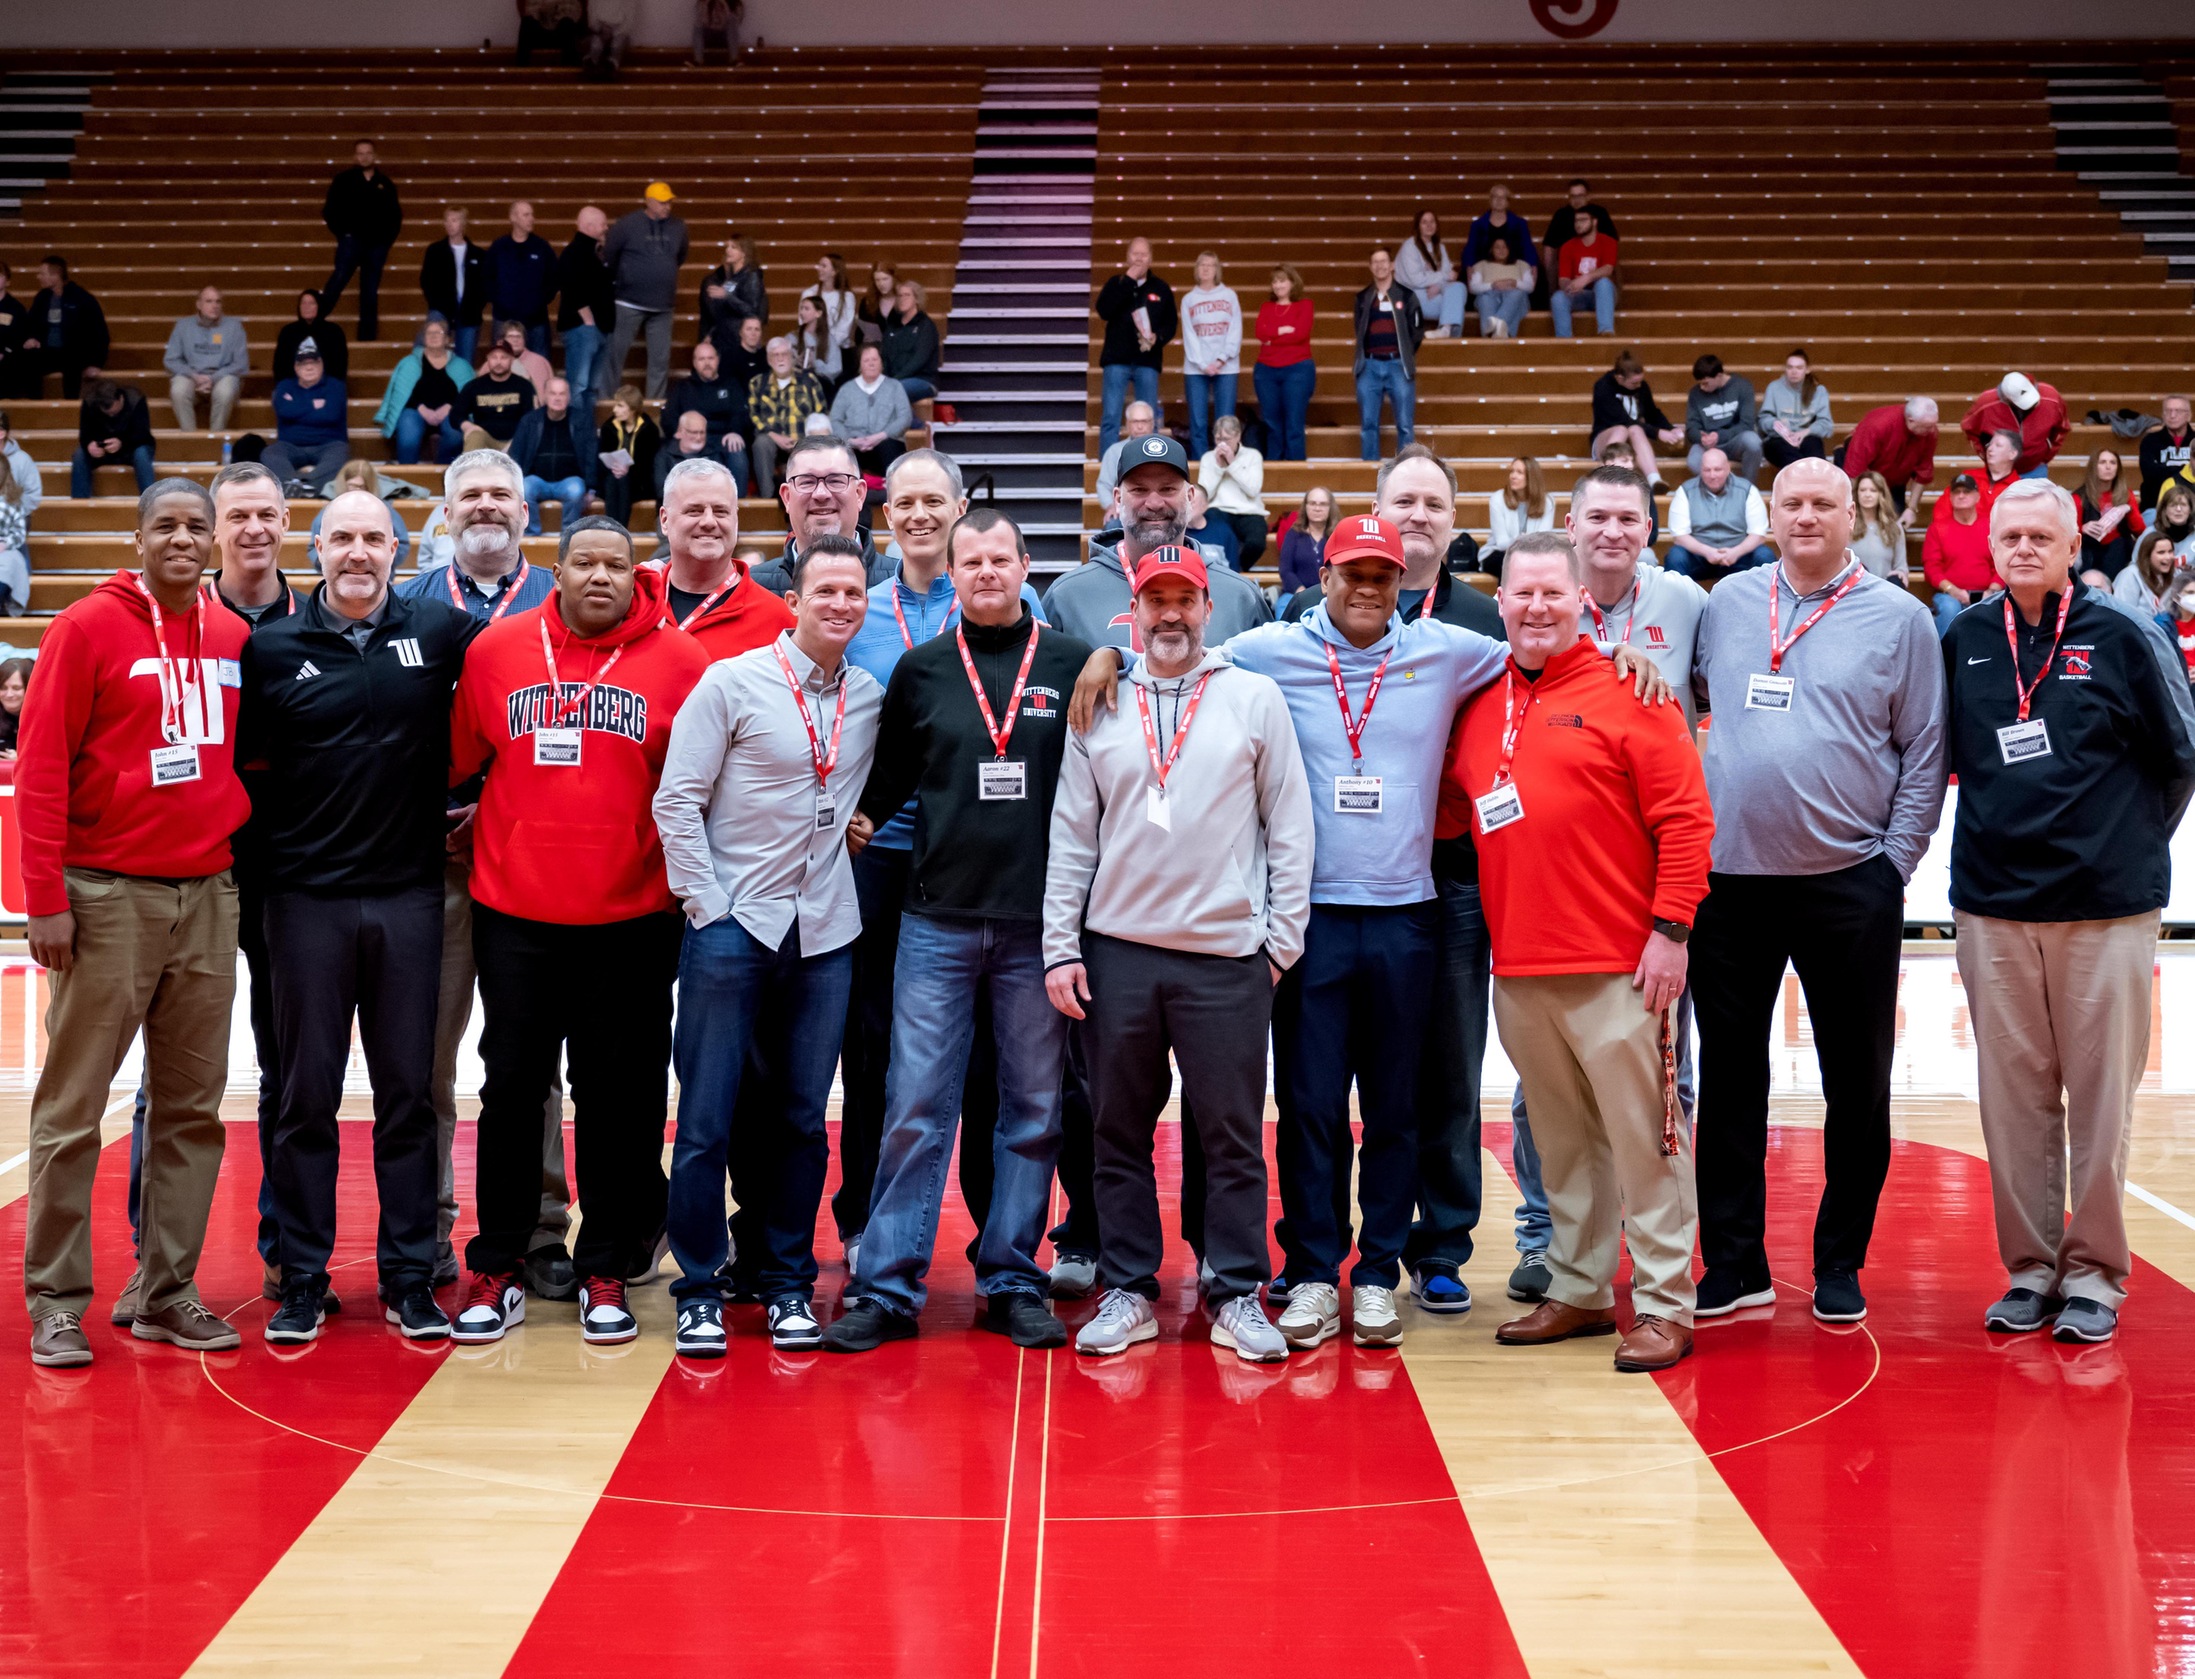 The players and coaches from the 1993-94 Wittenberg men's basketball team that reached the Final Four were recognized at halftime of Saturday's Champions Day game against Wooster. | Photo by John Coffman